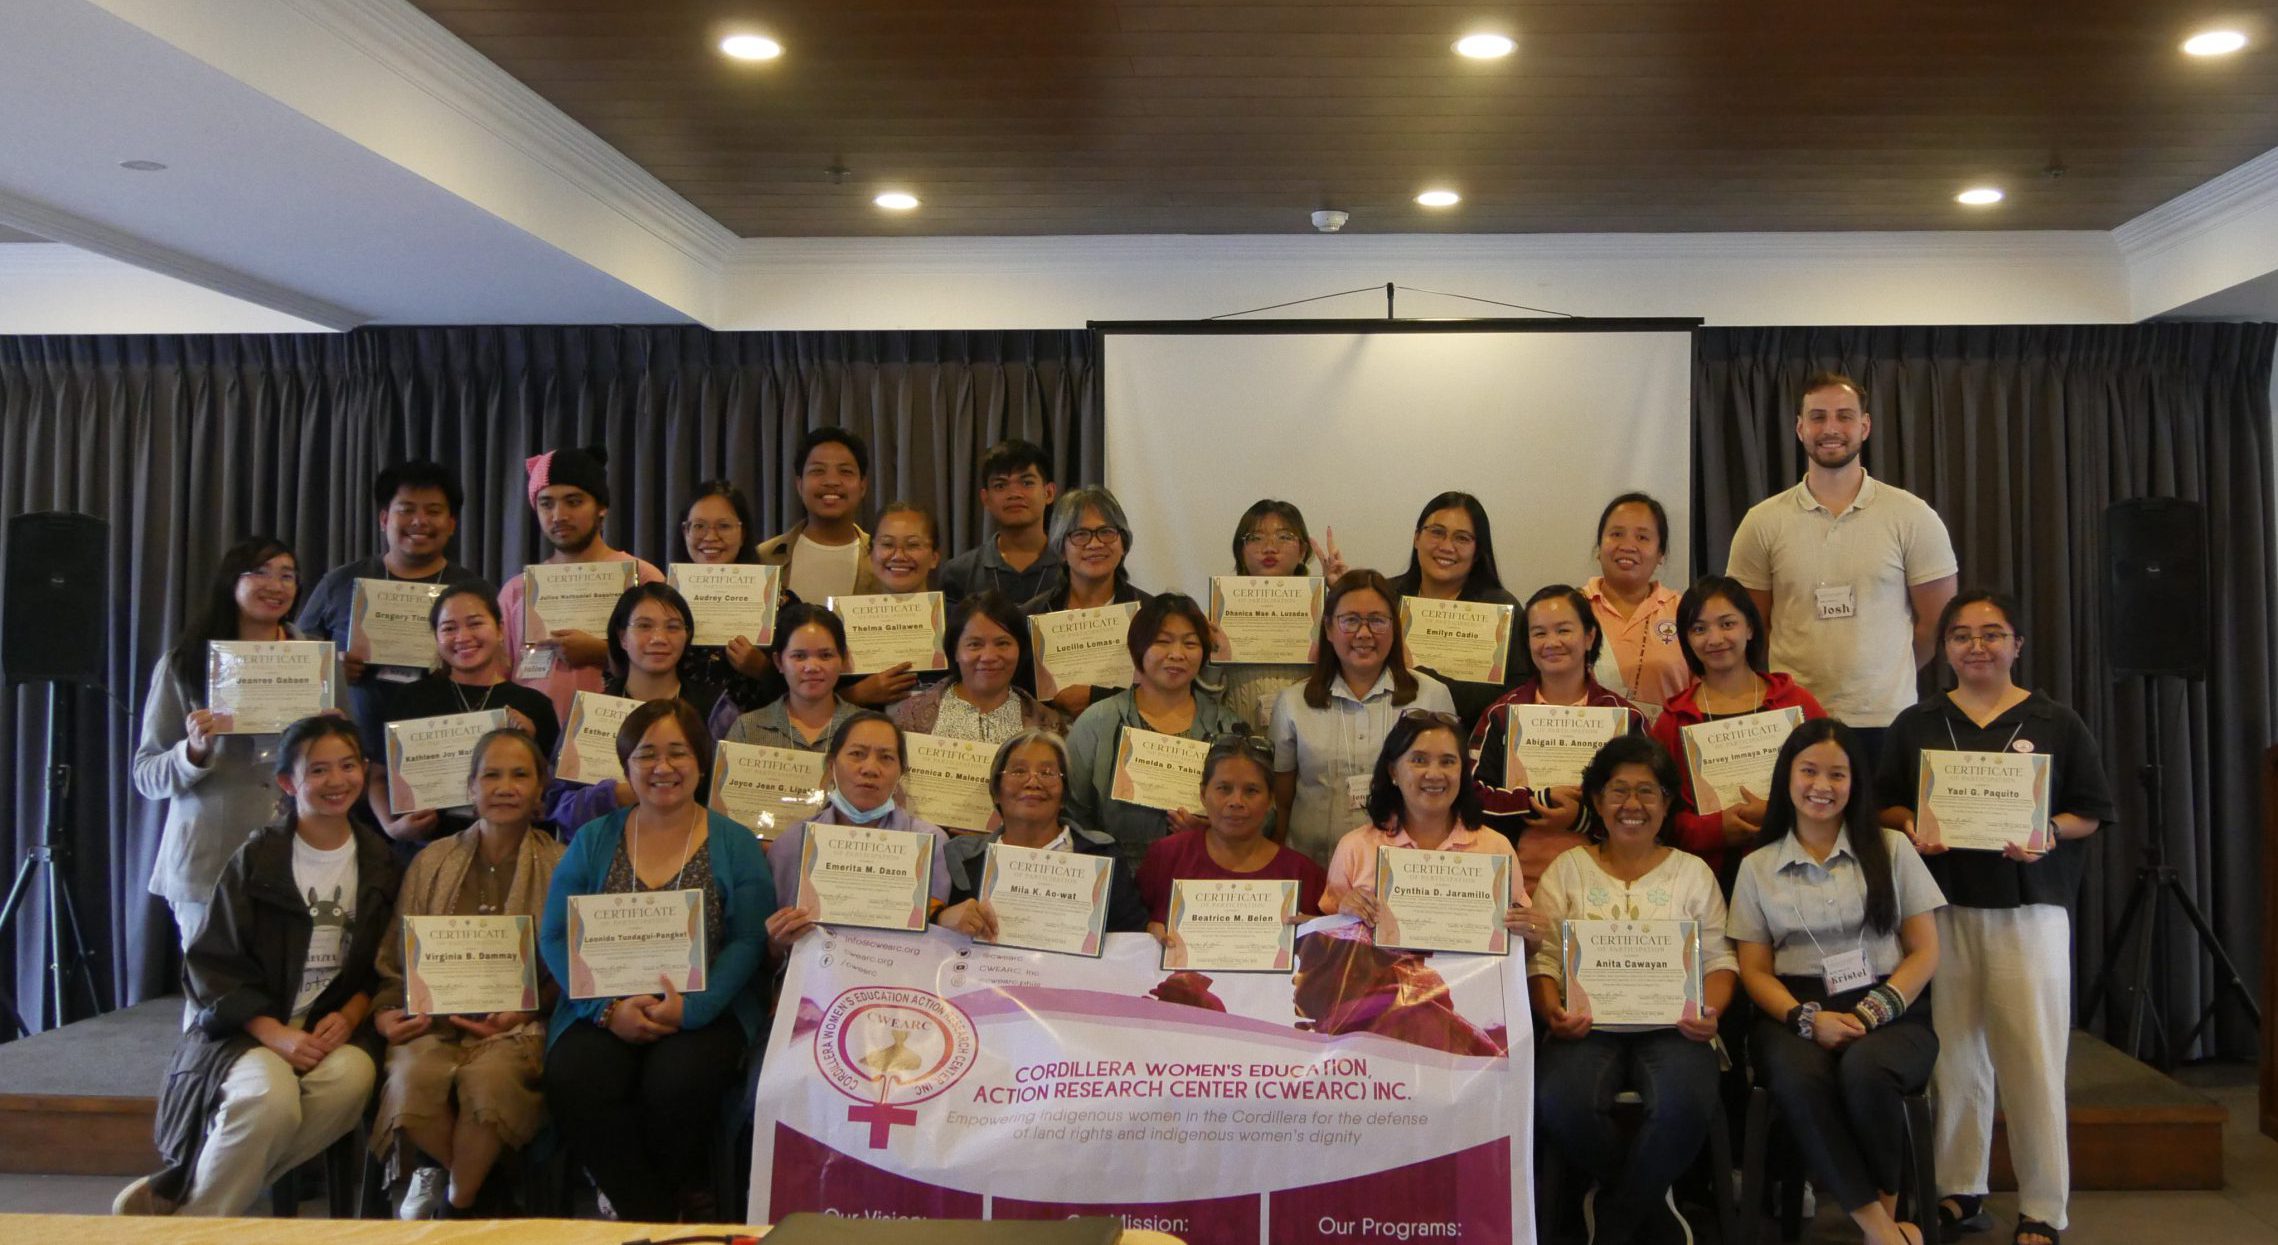 SLU Conducts Psychosocial Processing Training for Community Leaders and Workers